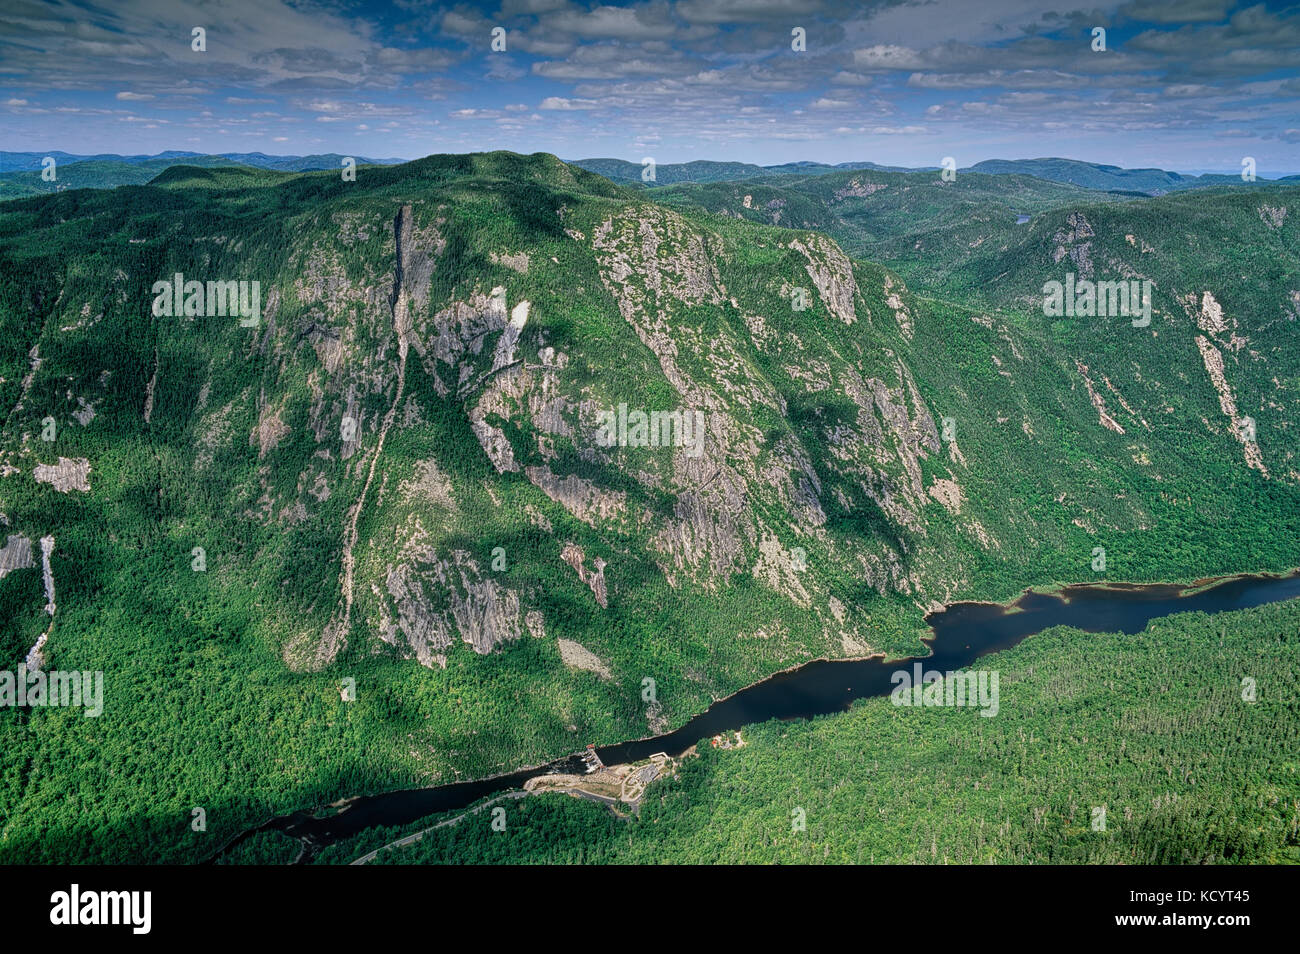 View Of The Malbaie River Valley In The Hautes Gorges De La Riviere